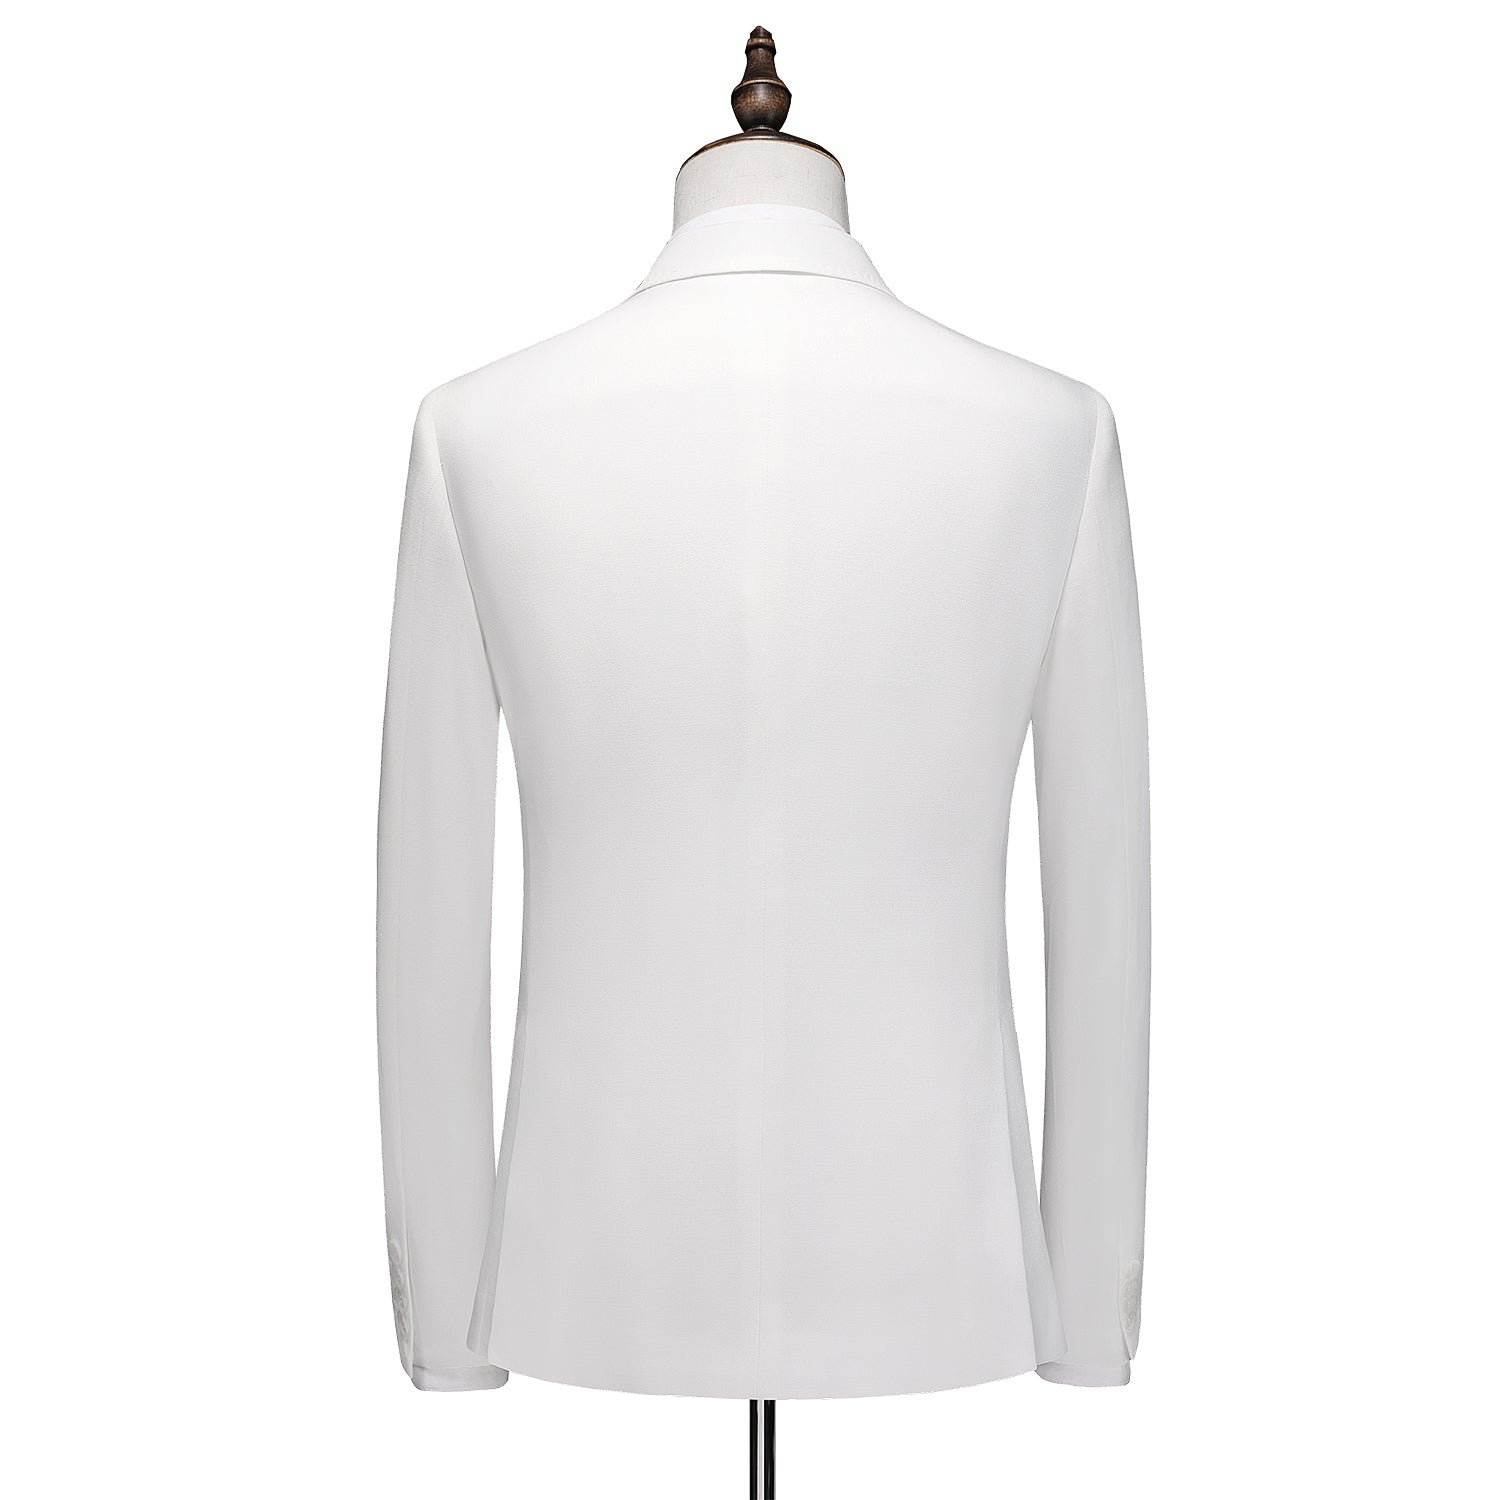 Men's Solid White Double Breasted Blazer